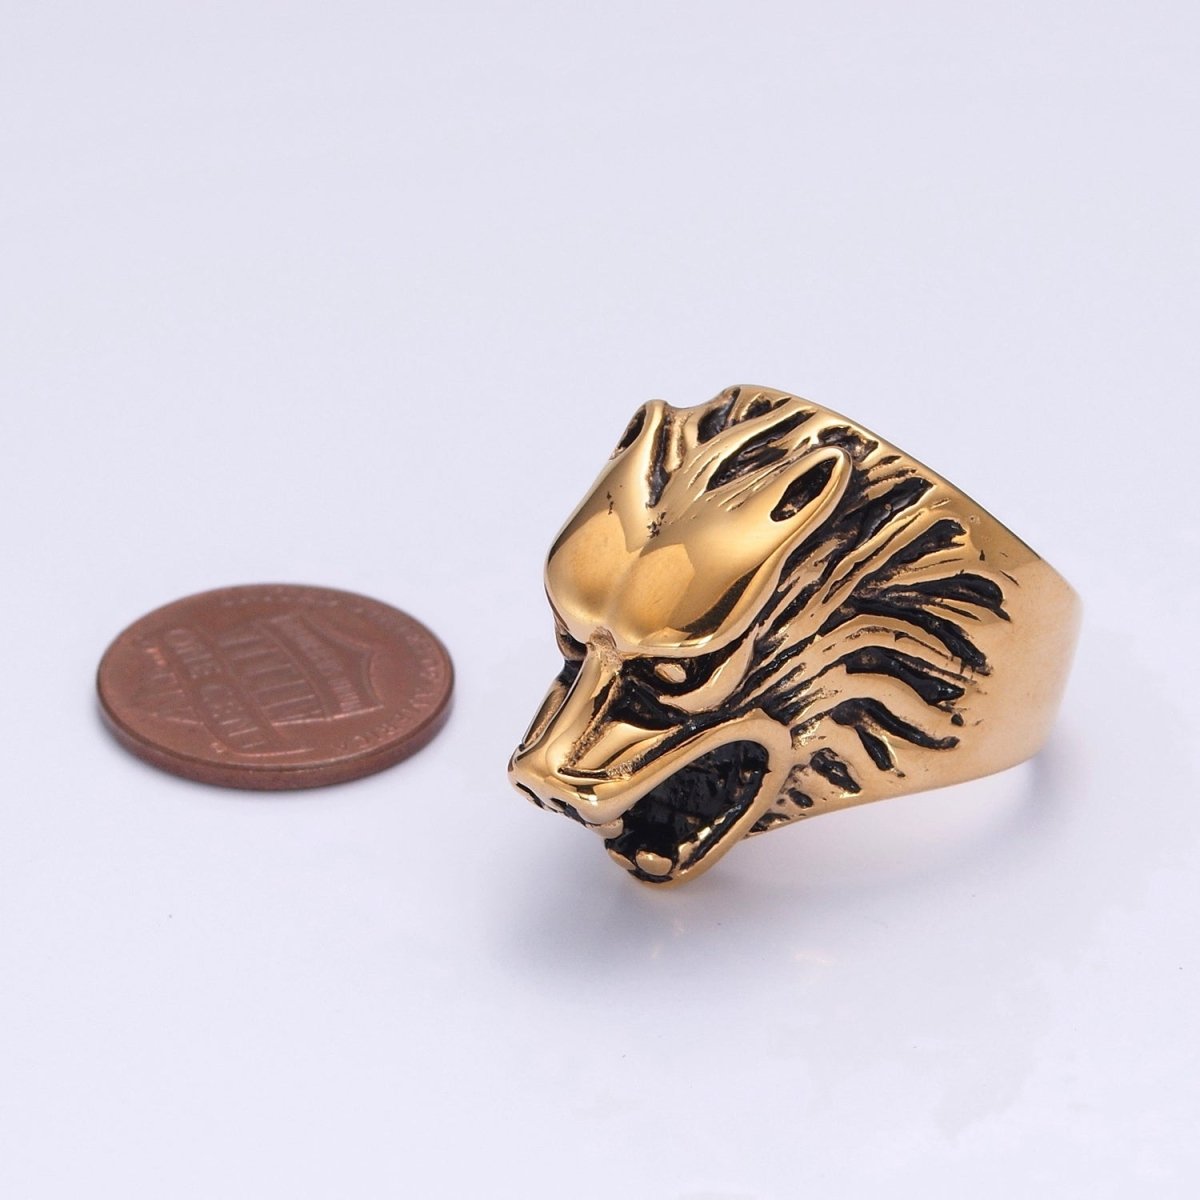 Stainless Steel Antique Gold Wolf Head Biker Ring for Men Jewelry S-012 S-013 - DLUXCA